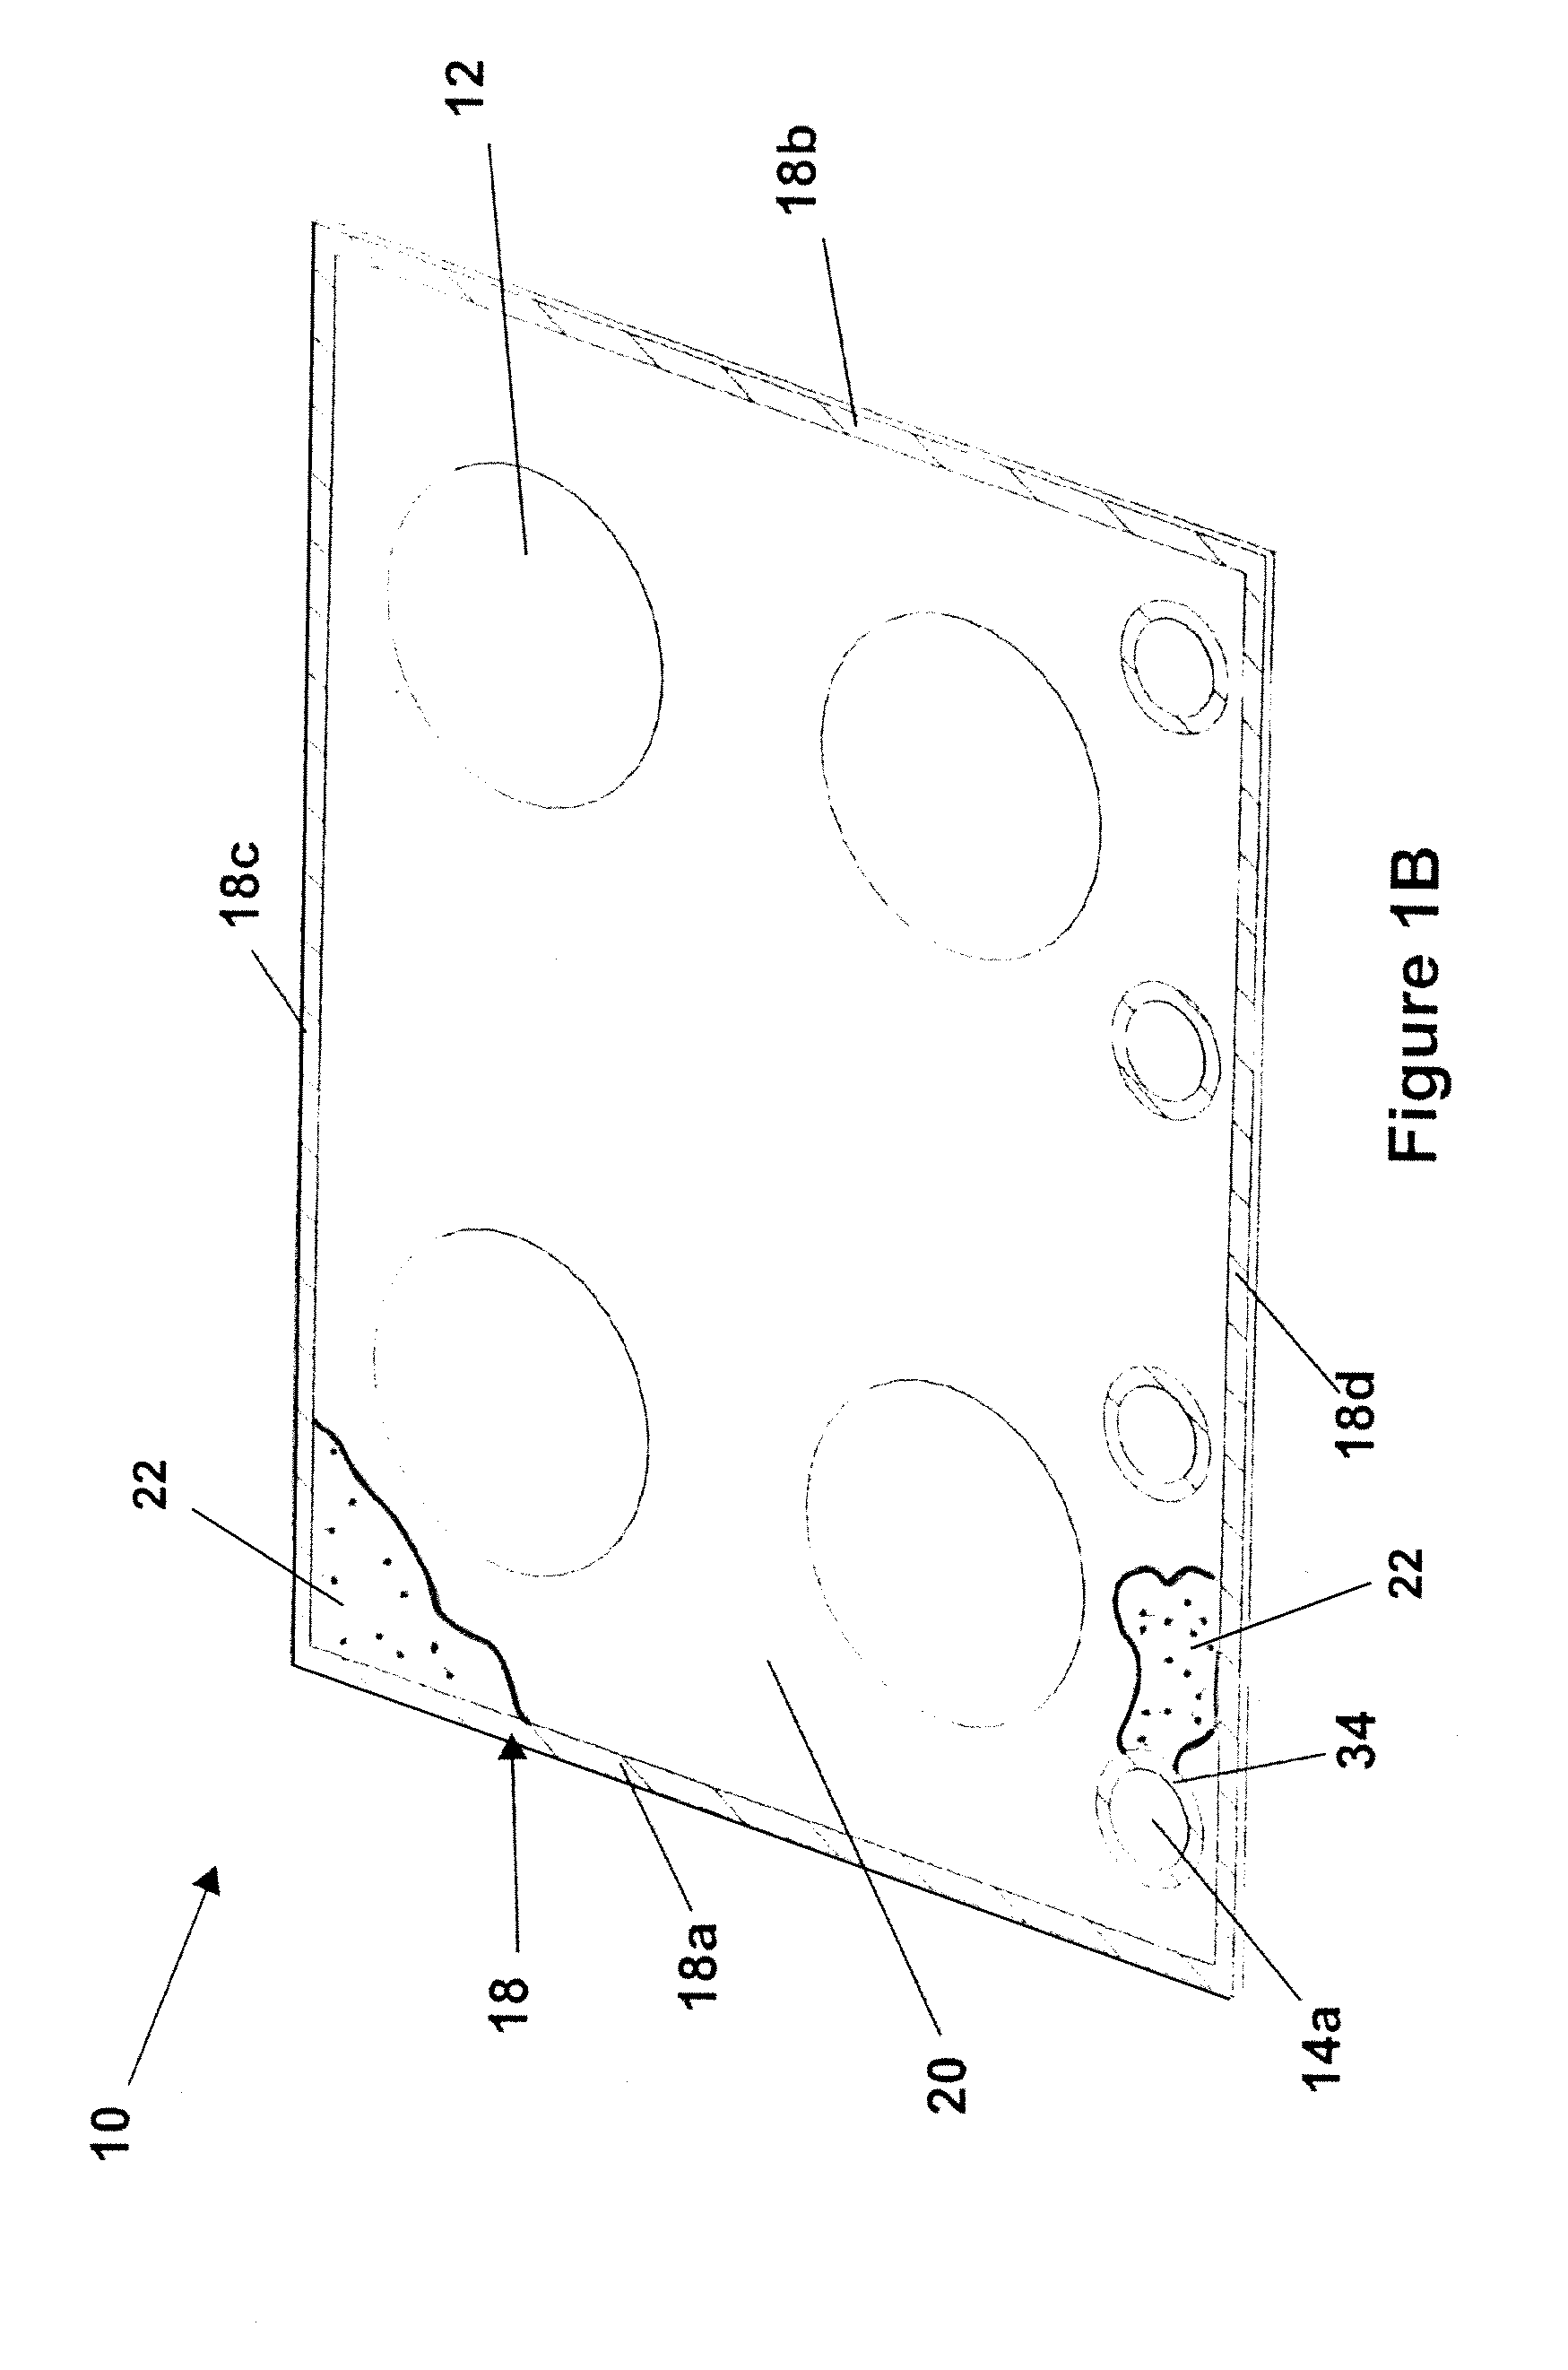 Cooking appliance surfaces having spill containment pattern and methods of making the same